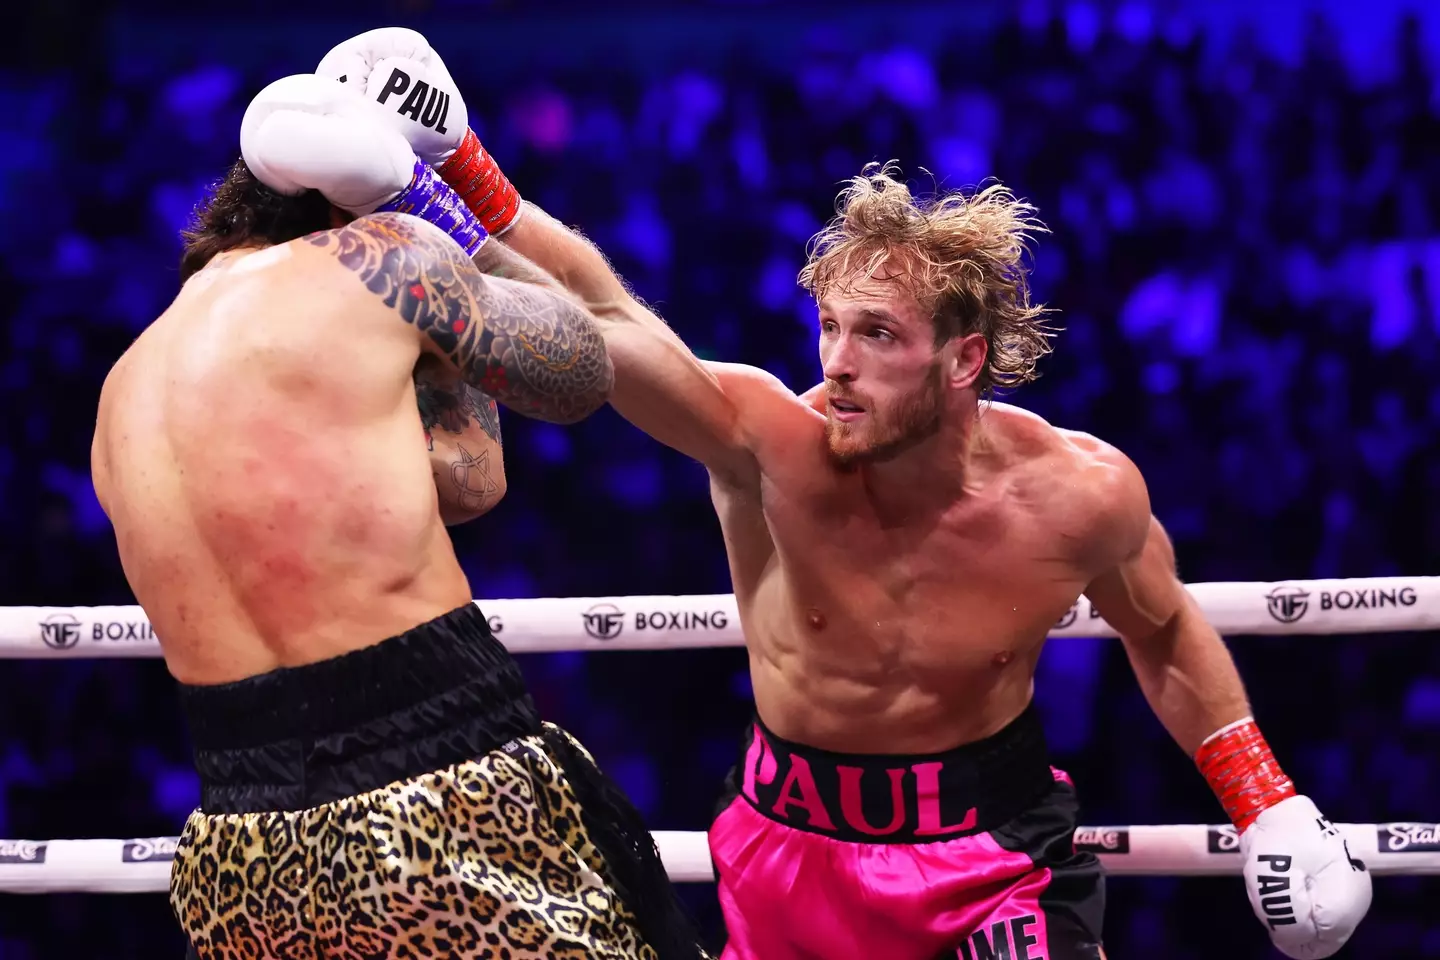 Logan Paul and Dillon Danis fought in Manchester on 14 October.